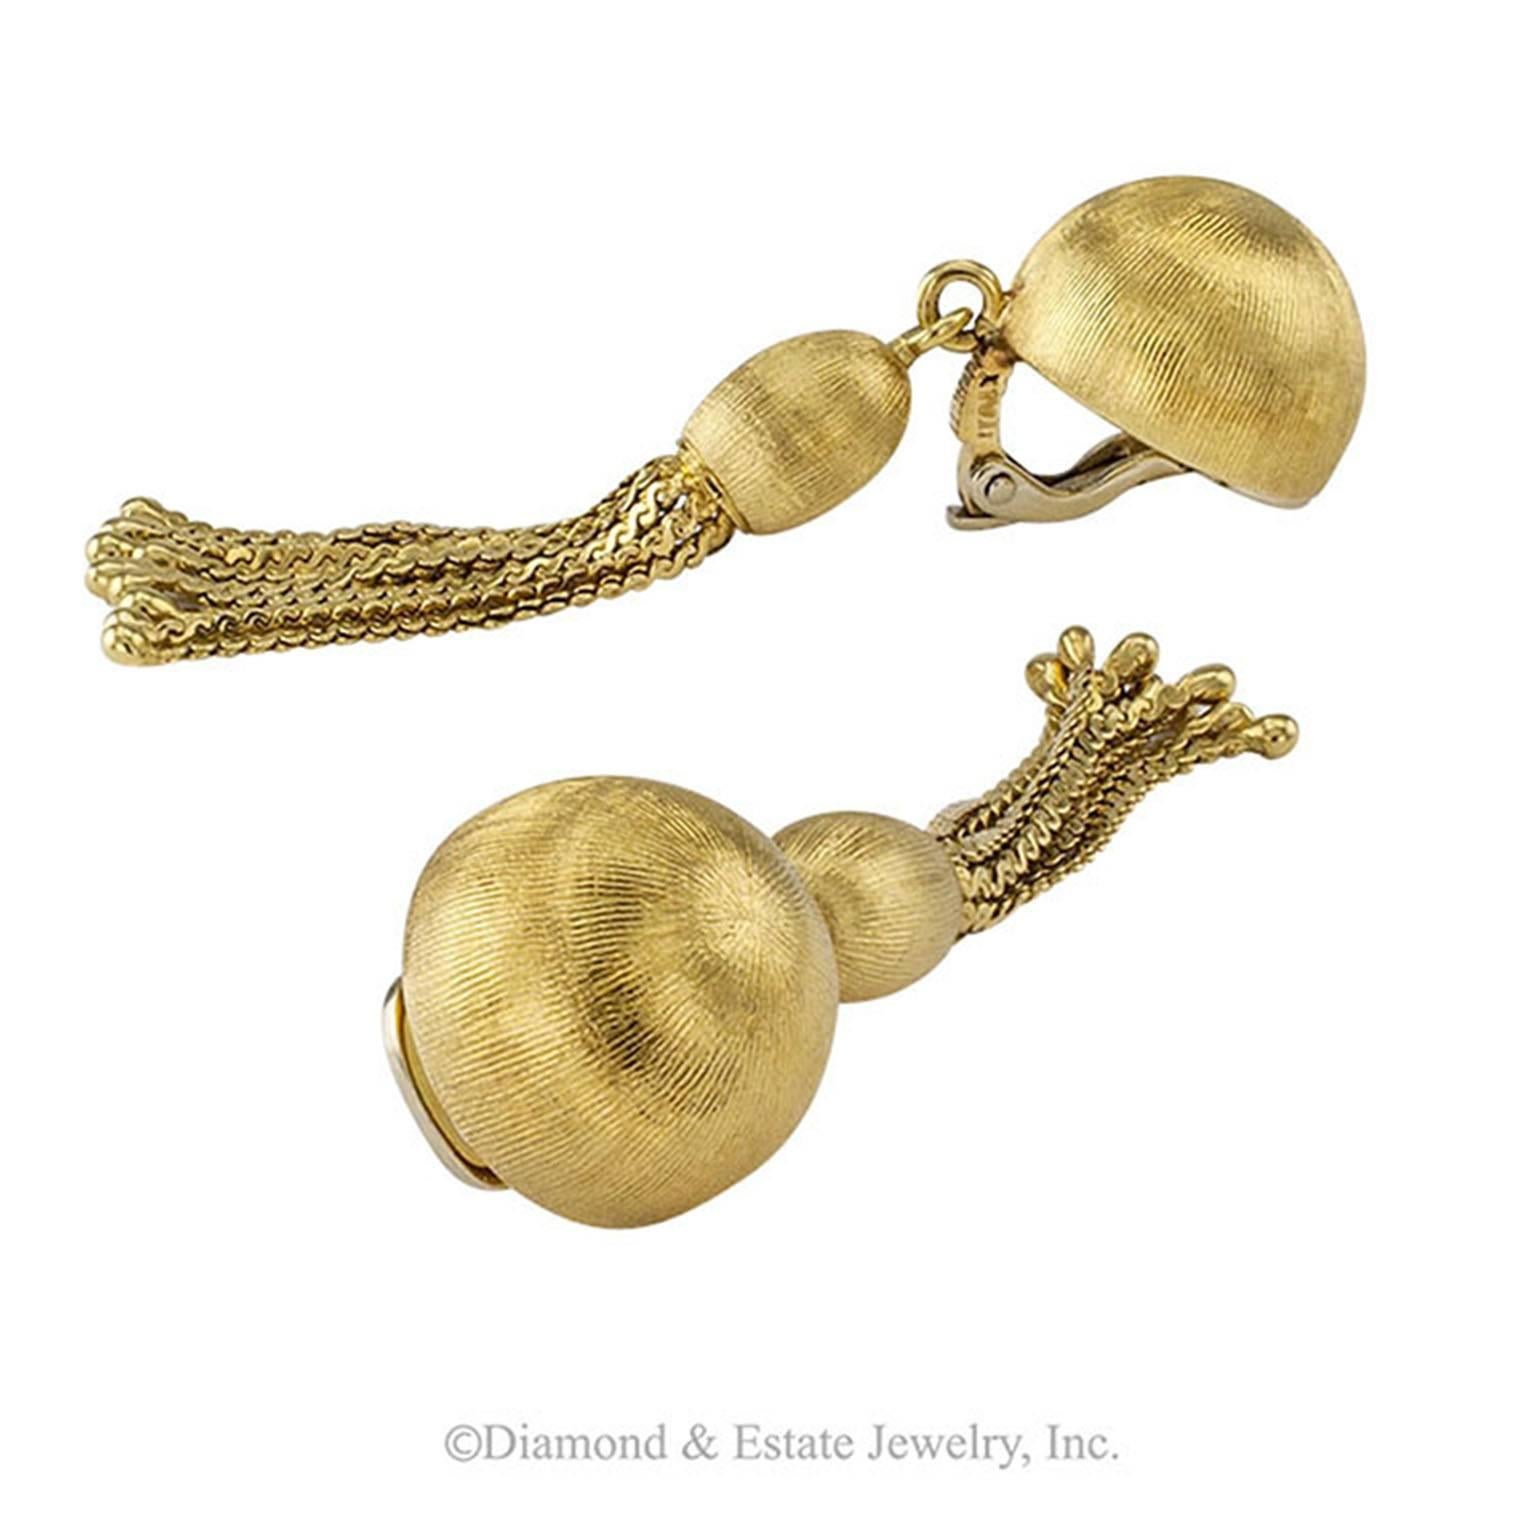 18-Karat Gold Swinging ball and Tassel Ear Clips

Swinging ball and tassel 18-karat yellow gold earrings circa 1960.  The classic gold dome earring design elevated to Dancing With The Stars status by virtue of the pendant ball and tassel